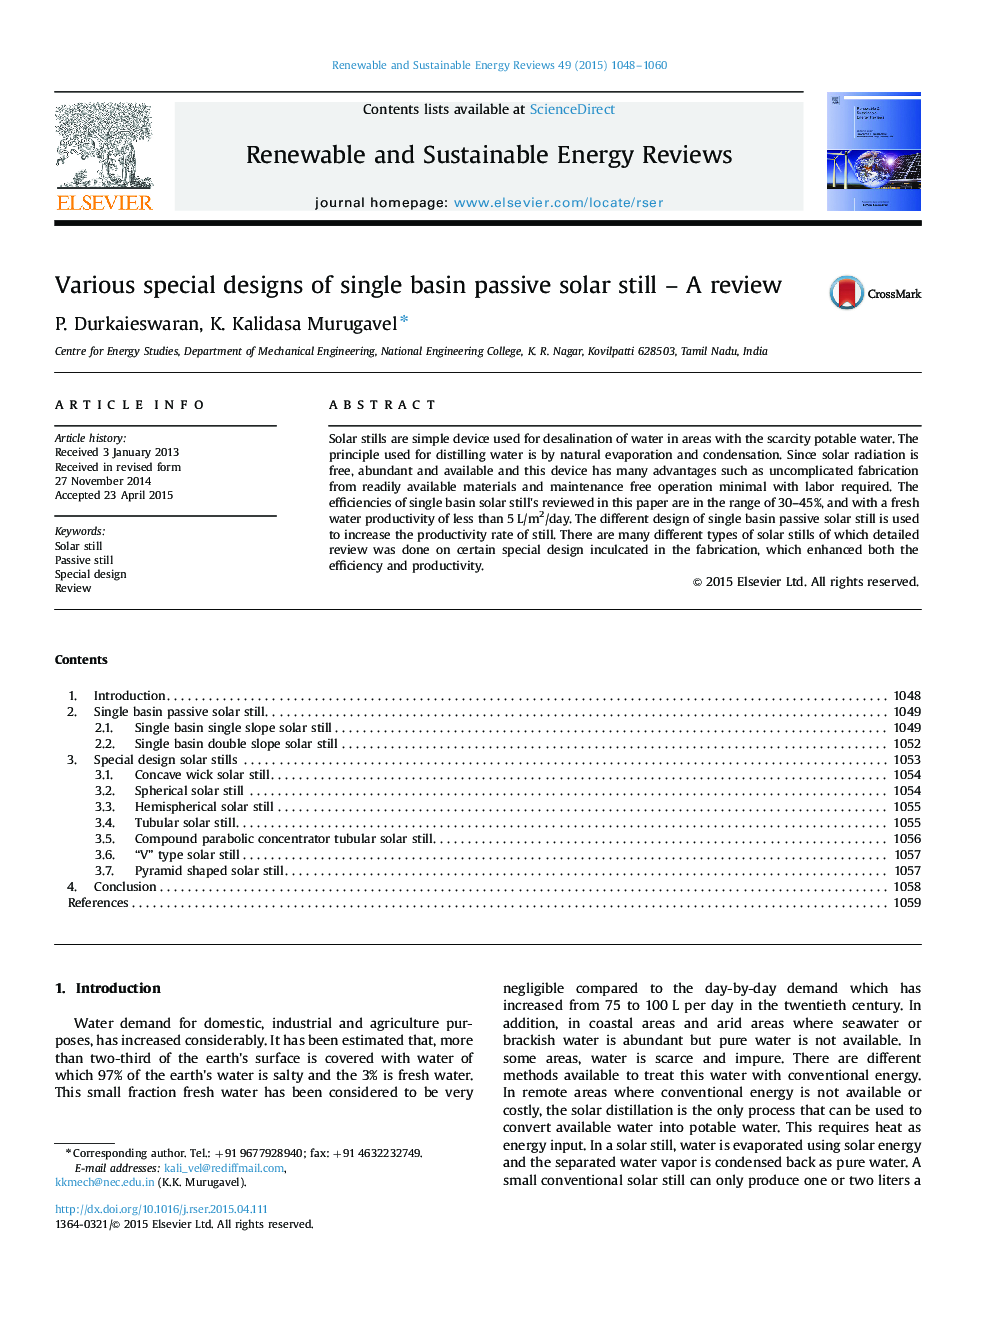 Various special designs of single basin passive solar still - A review